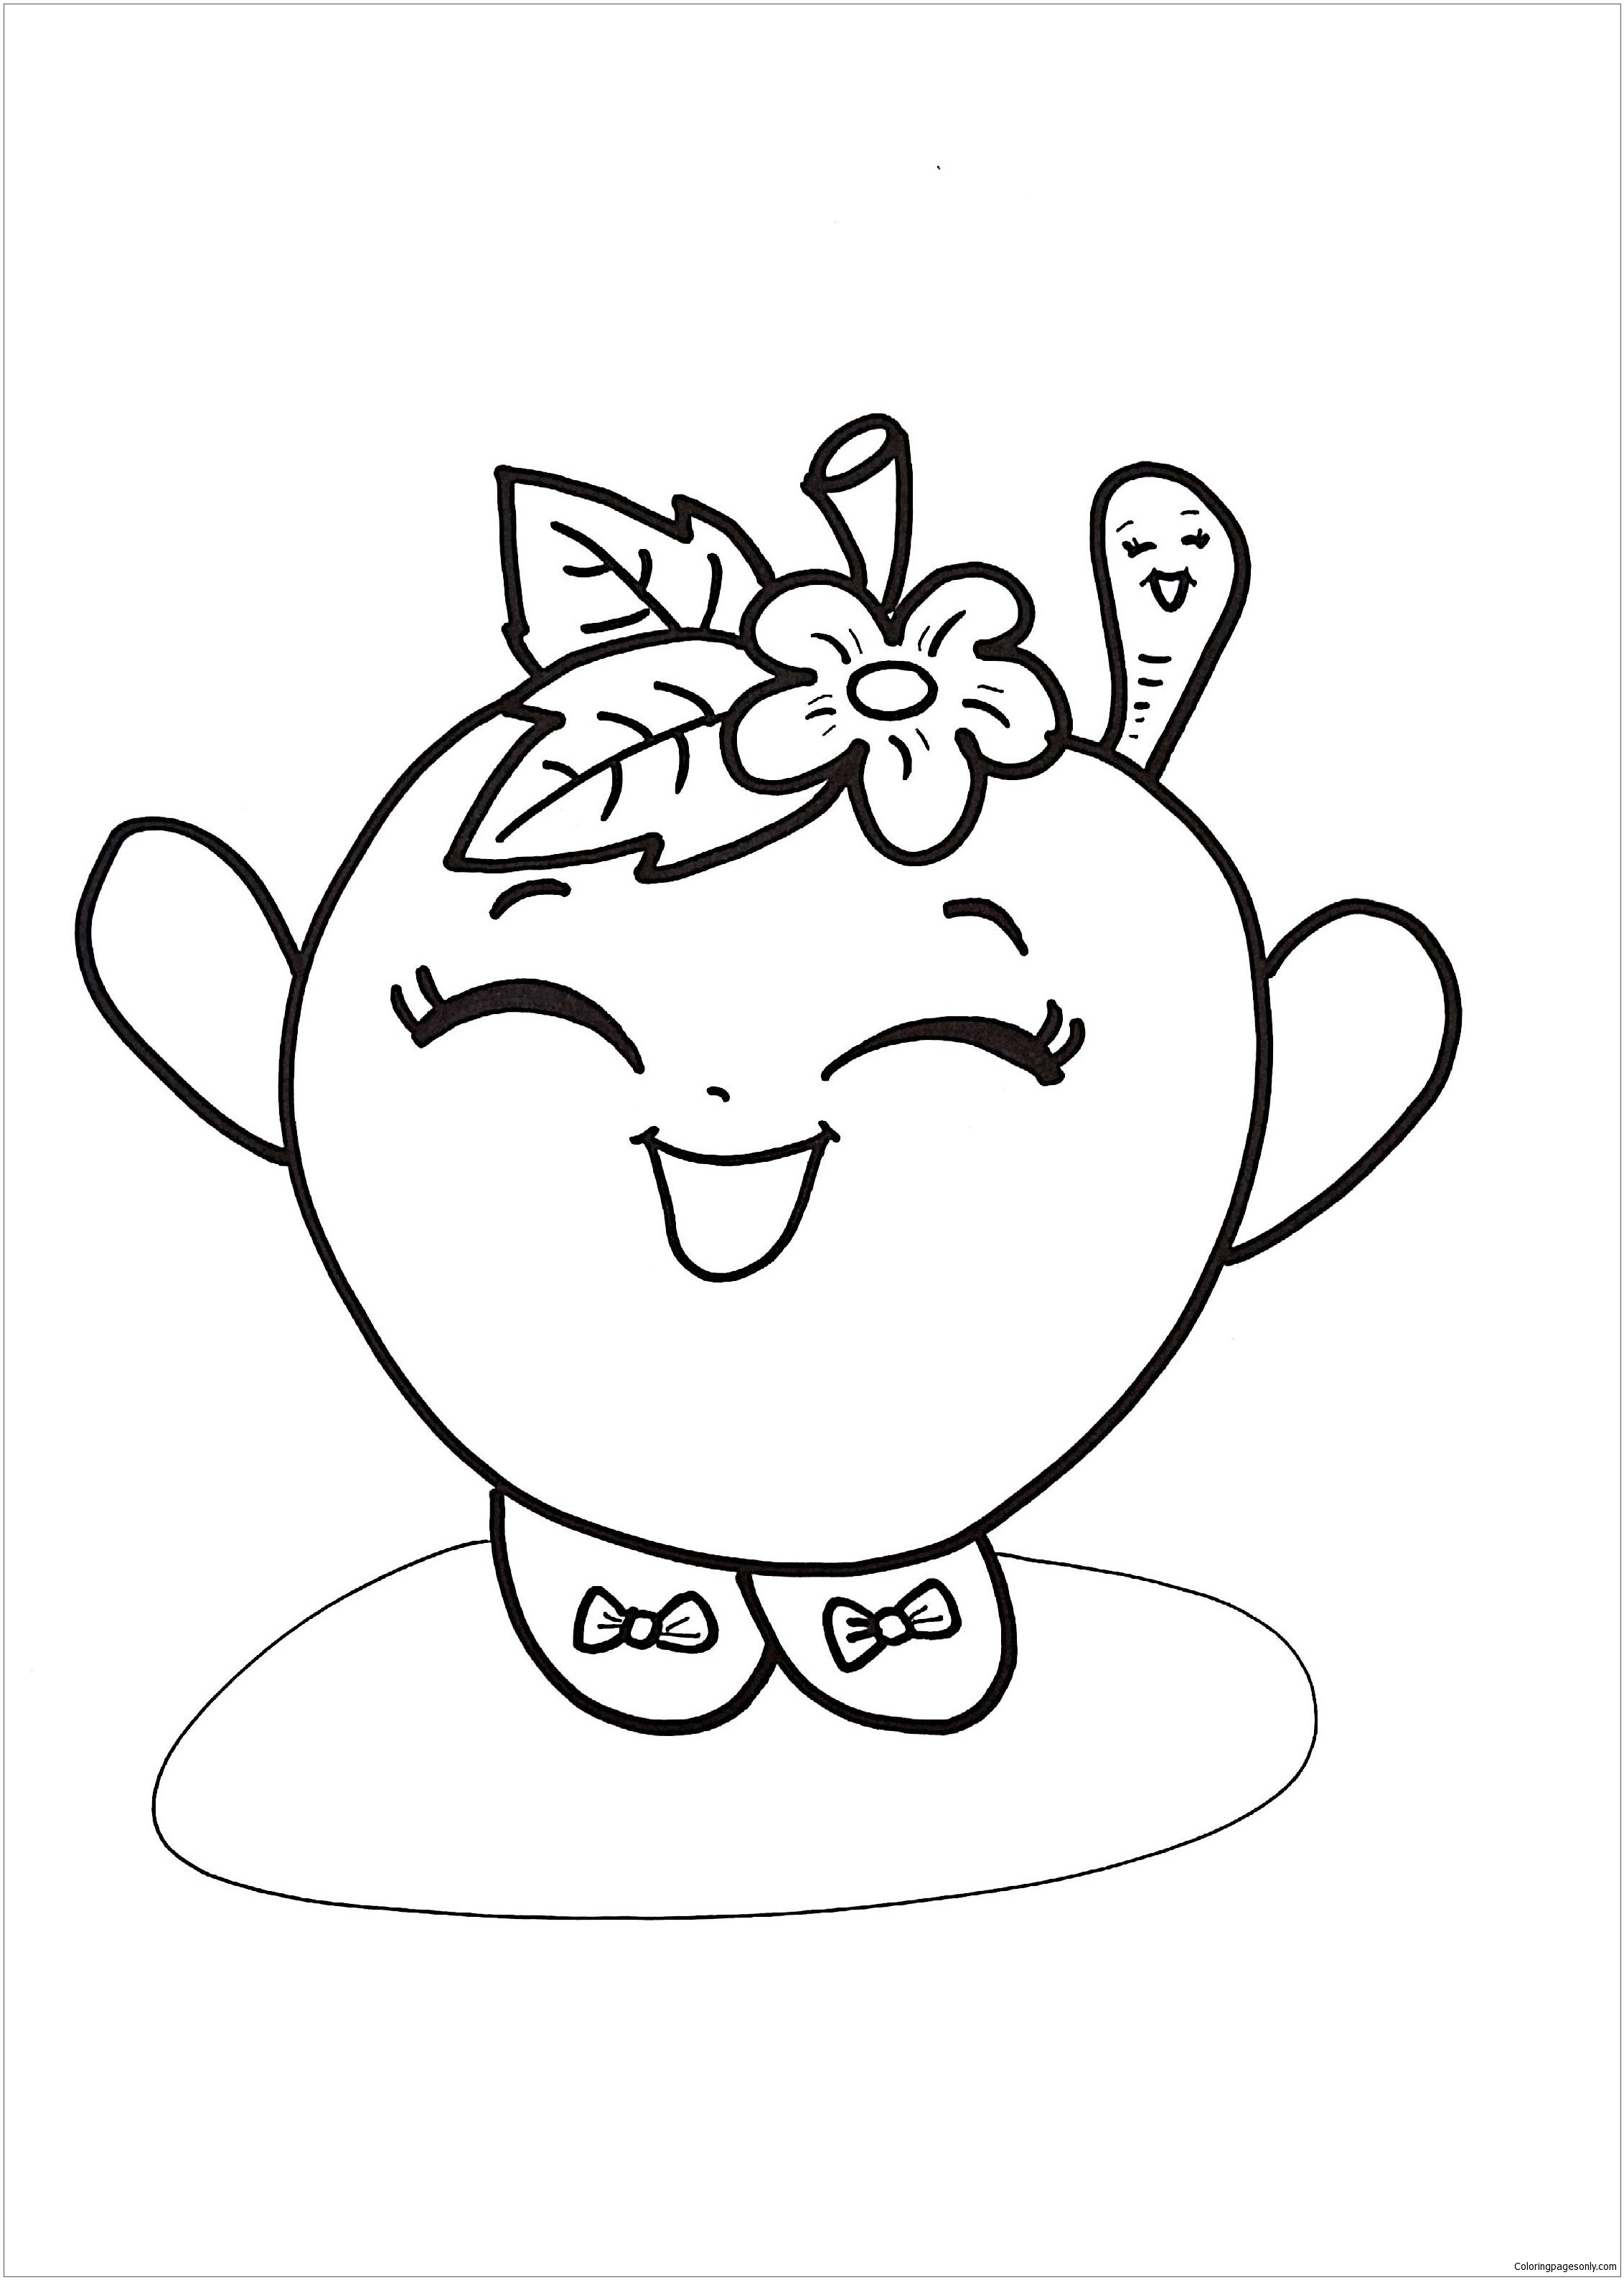 Captivating Apple Blossom Shopkins Coloring Pages Toys And Dolls Coloring Pages Coloring Pages For Kids And Adults